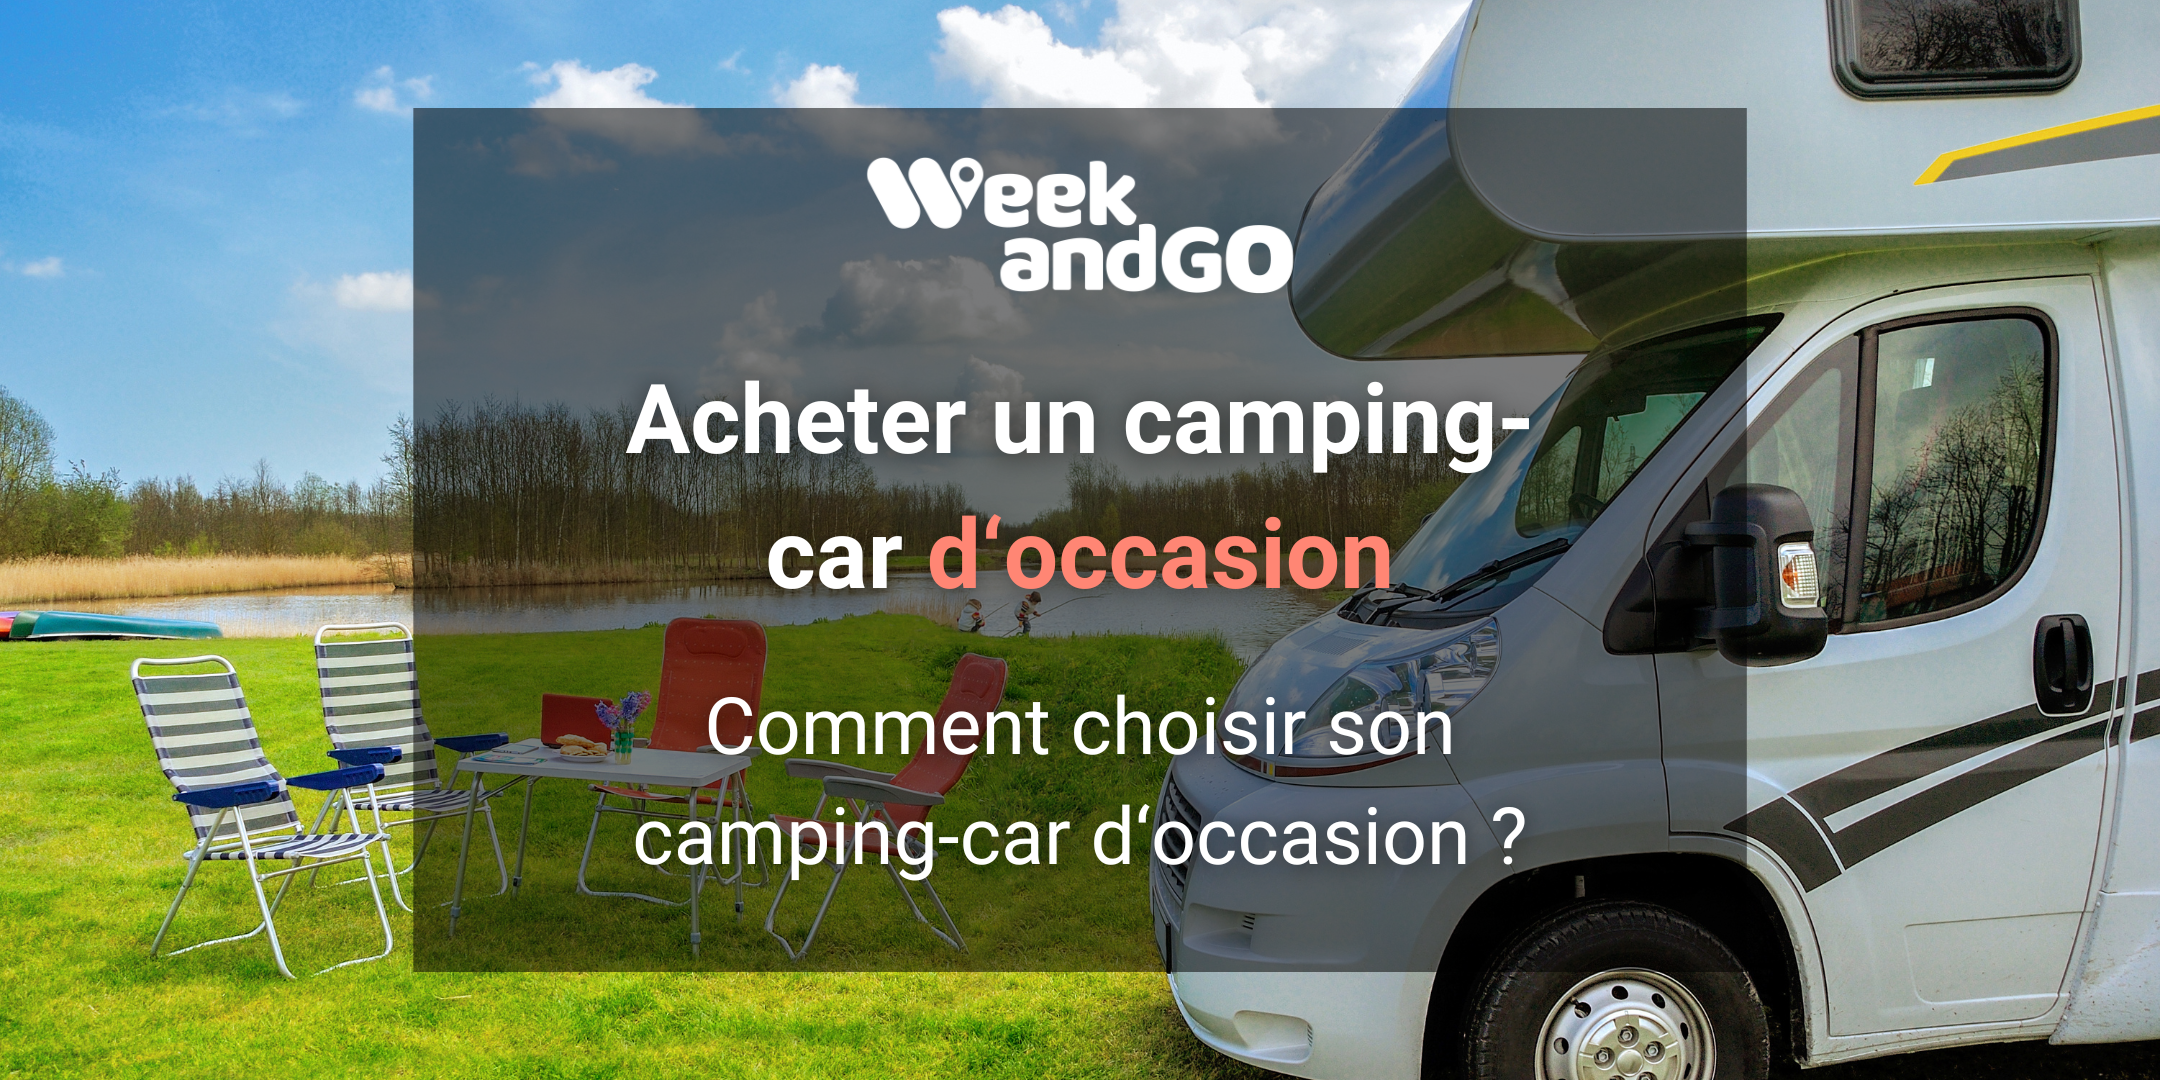 Comment choisir son camping-car d‘occasion ?